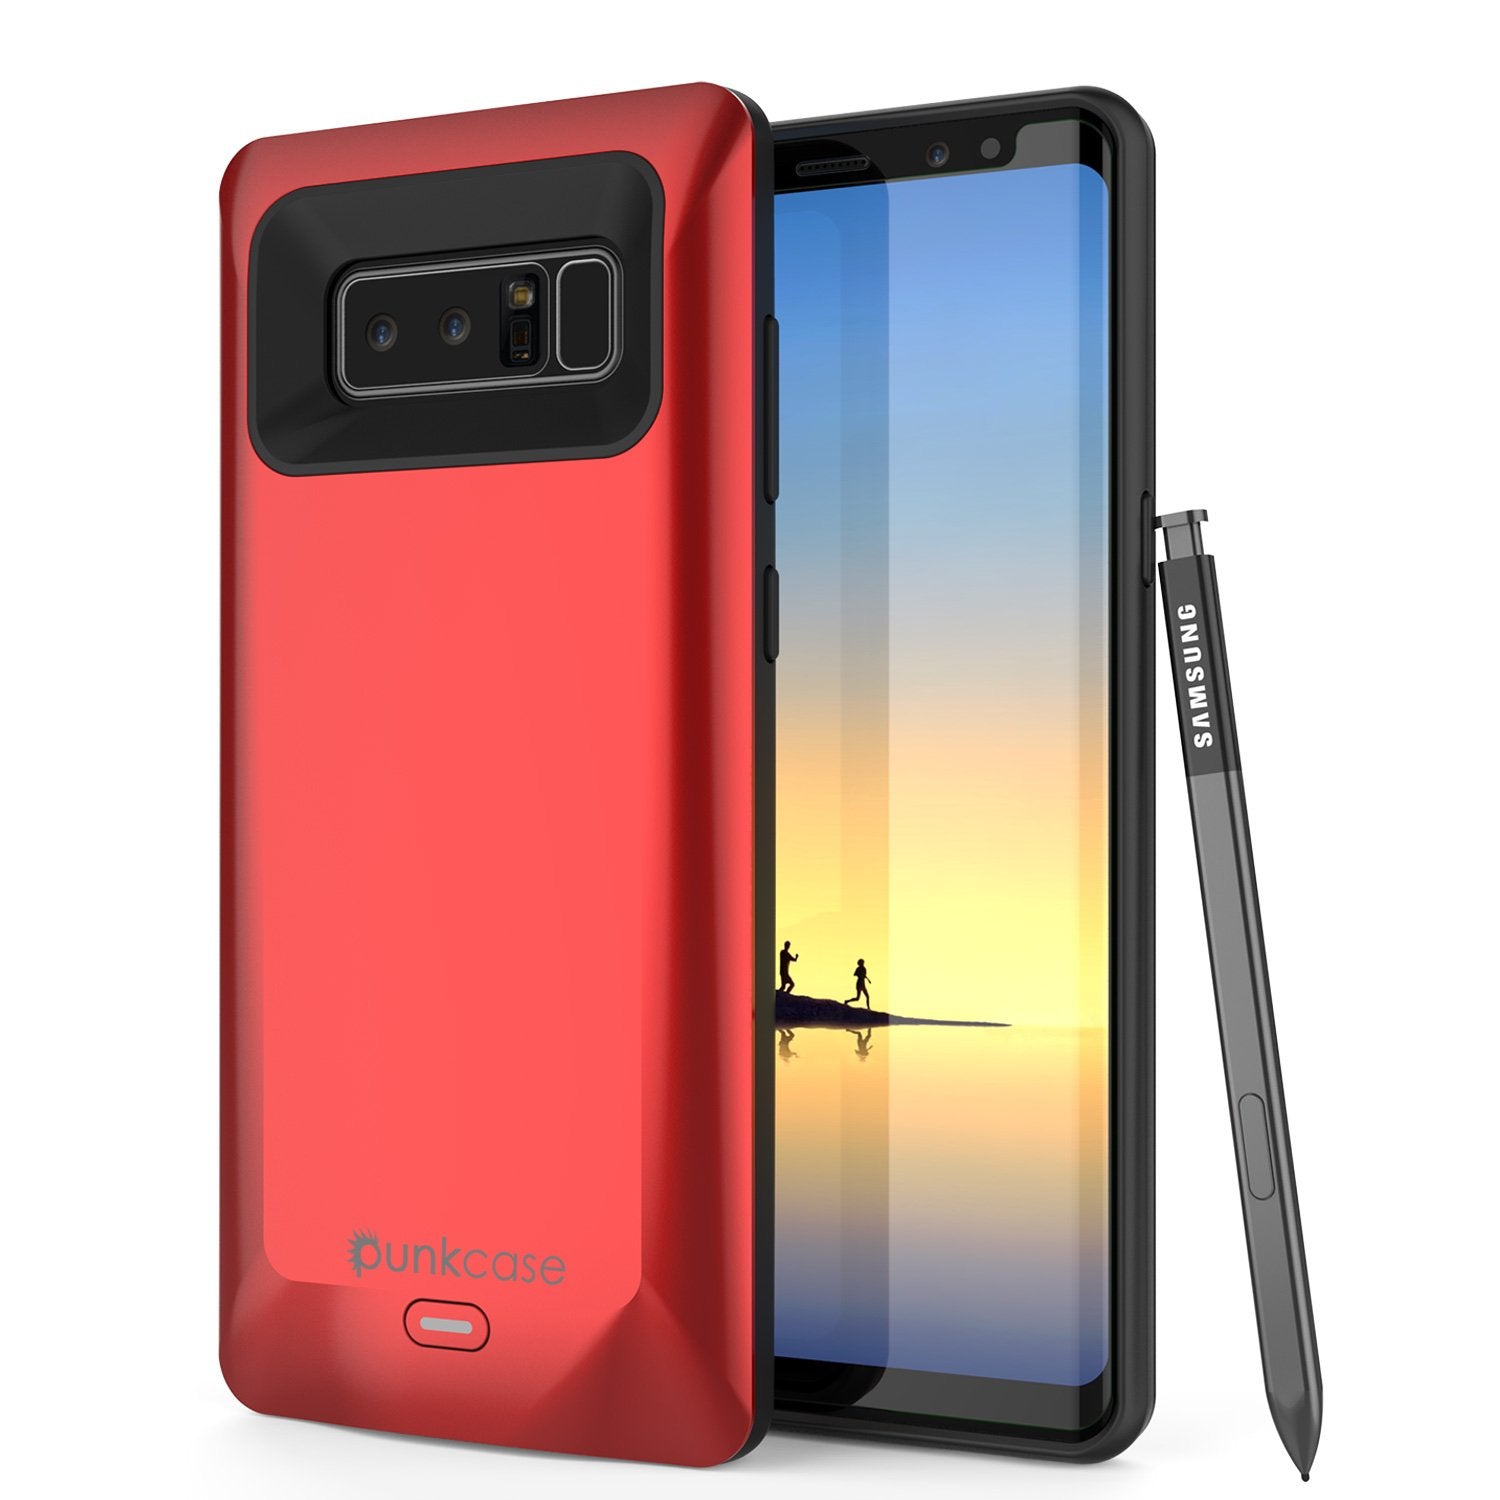 Galaxy Note 8 Battery PunkCase, 5000mAH Charger Case W/USB port, Red